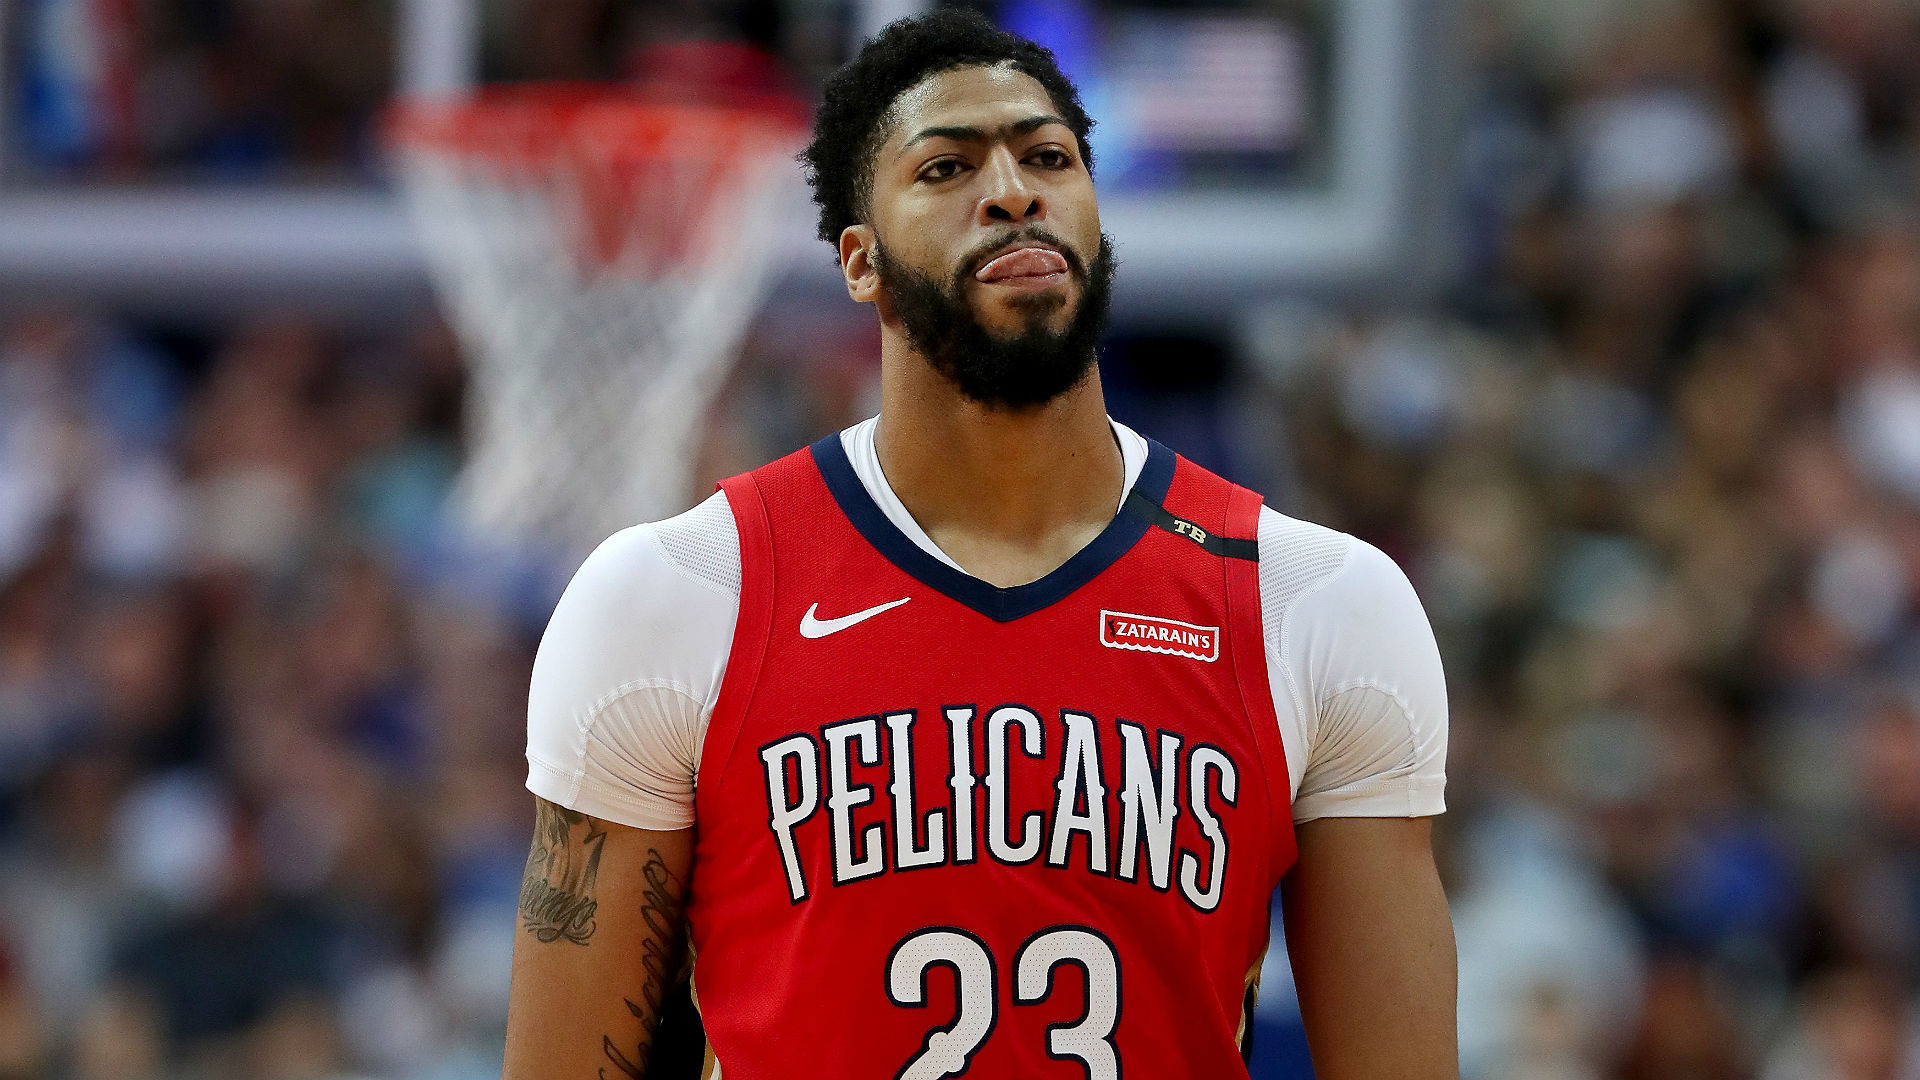 The Los Angeles Lakers appear to have finally landed their man – Anthony Davis.